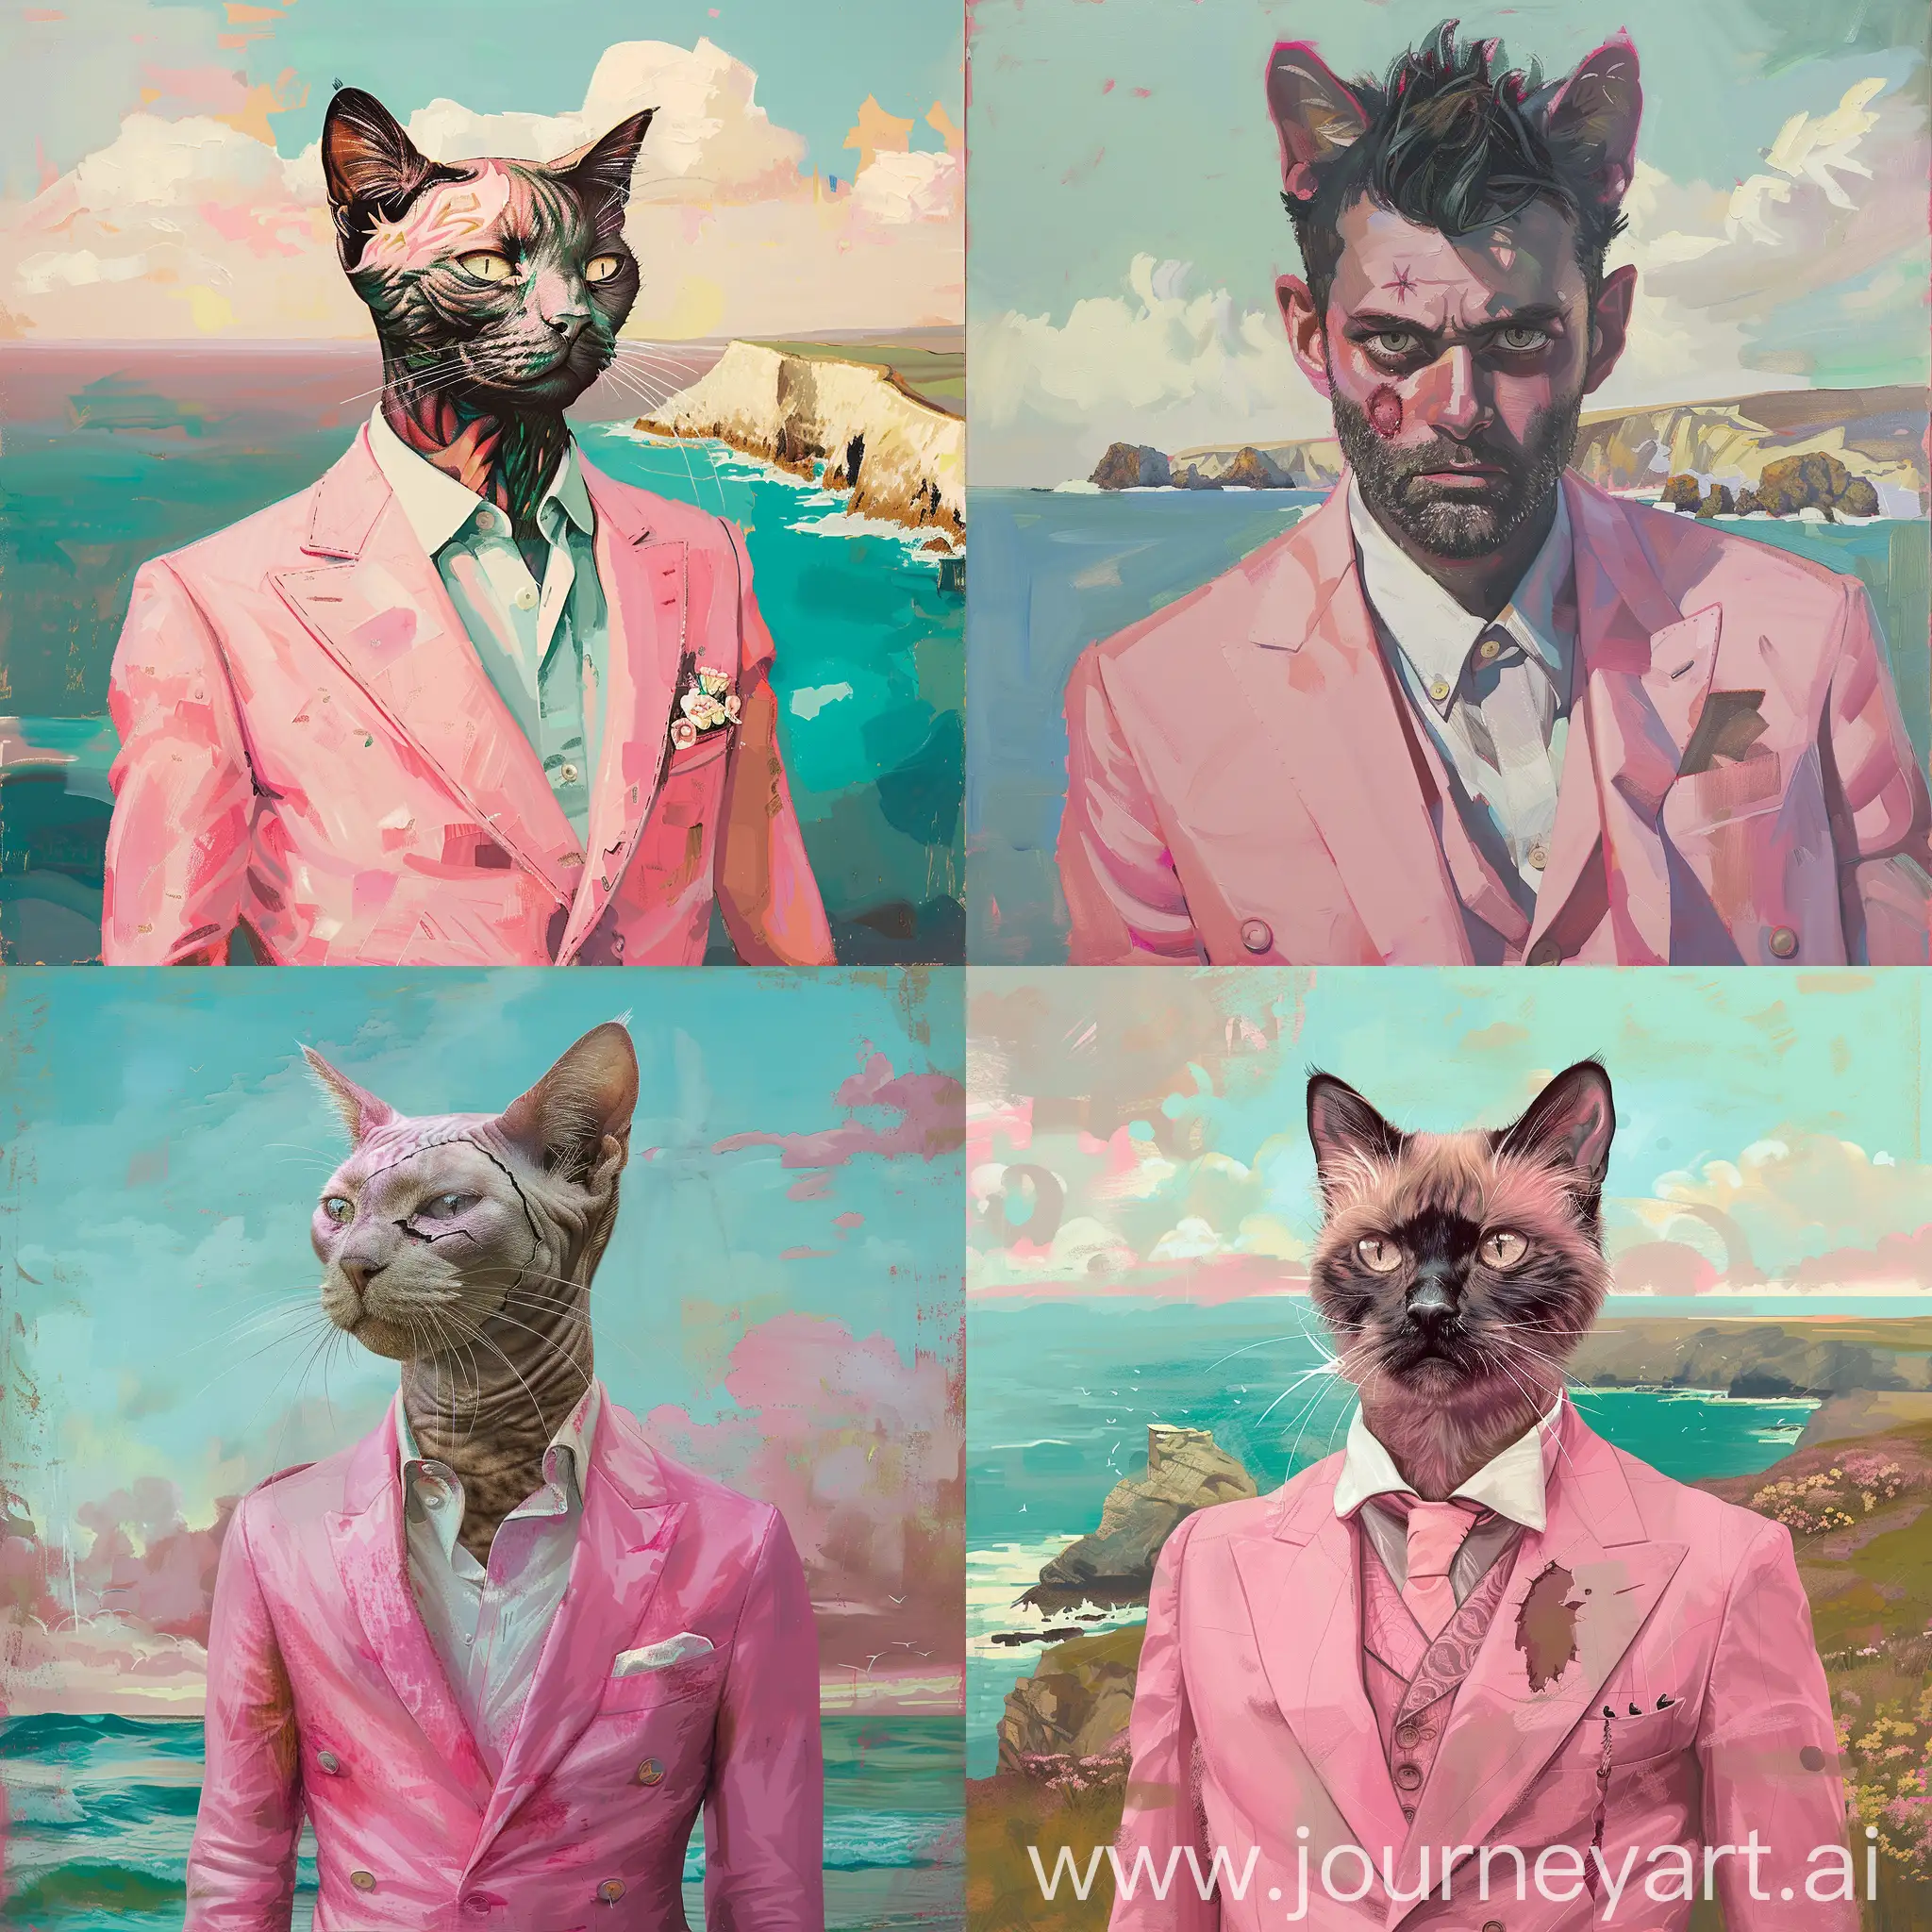 Fritz Scholder art style, serious cat man with a facial scar, donning a pink suit, whimsical yet somber mood, British coast background, pastel hues, 8k uhd Maximalist Details, profile picture